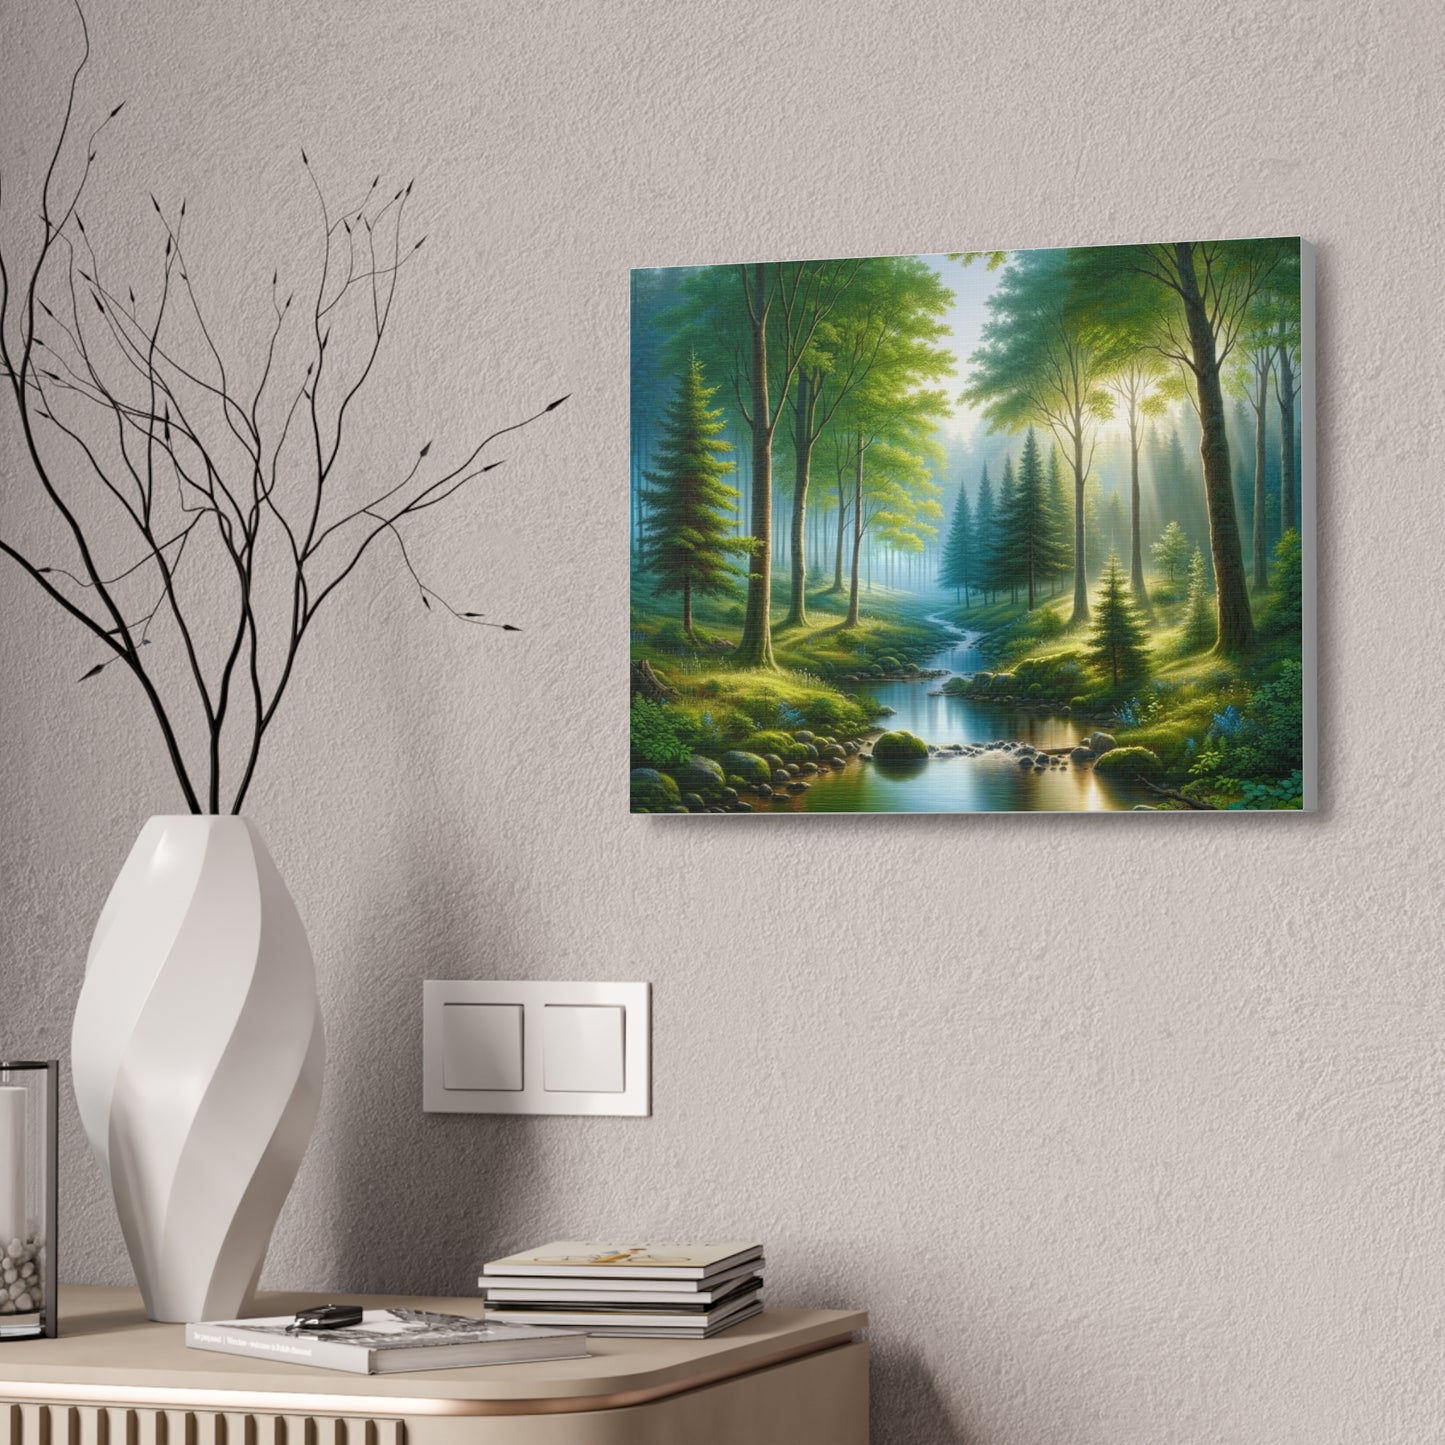 Whispering Woods: Tranquil Forest Stream Canvas Art